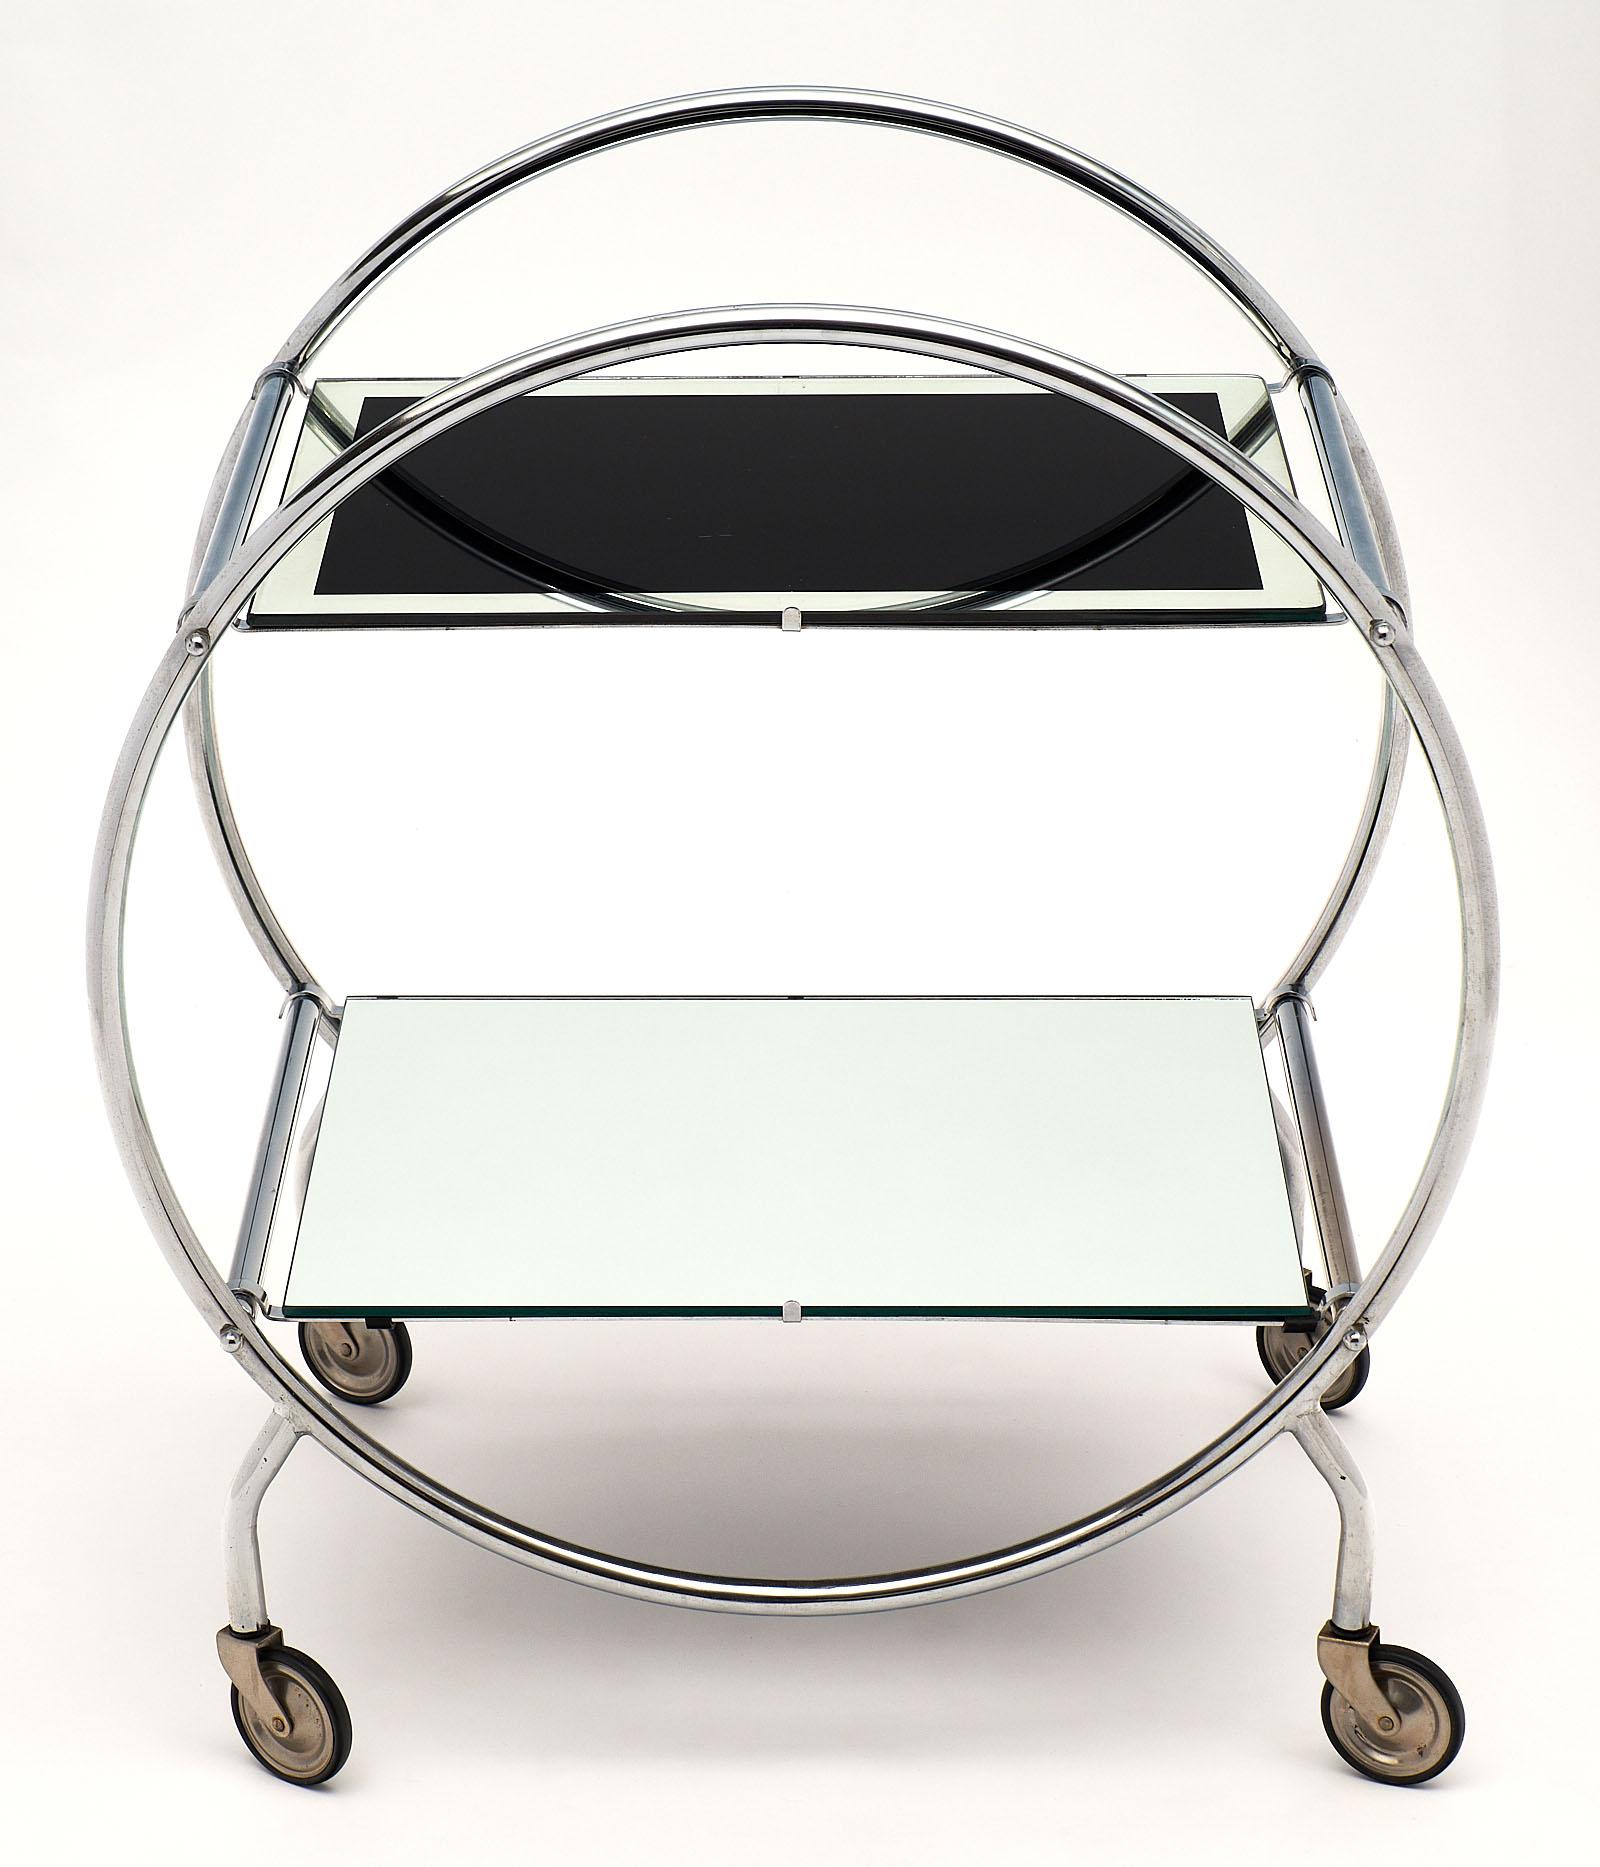 French vintage iconic bar cart of circular form, the original Mid-Century Modern structure supports original black glass shelf with a mirrored edge on the top and a mirrored shelf below.